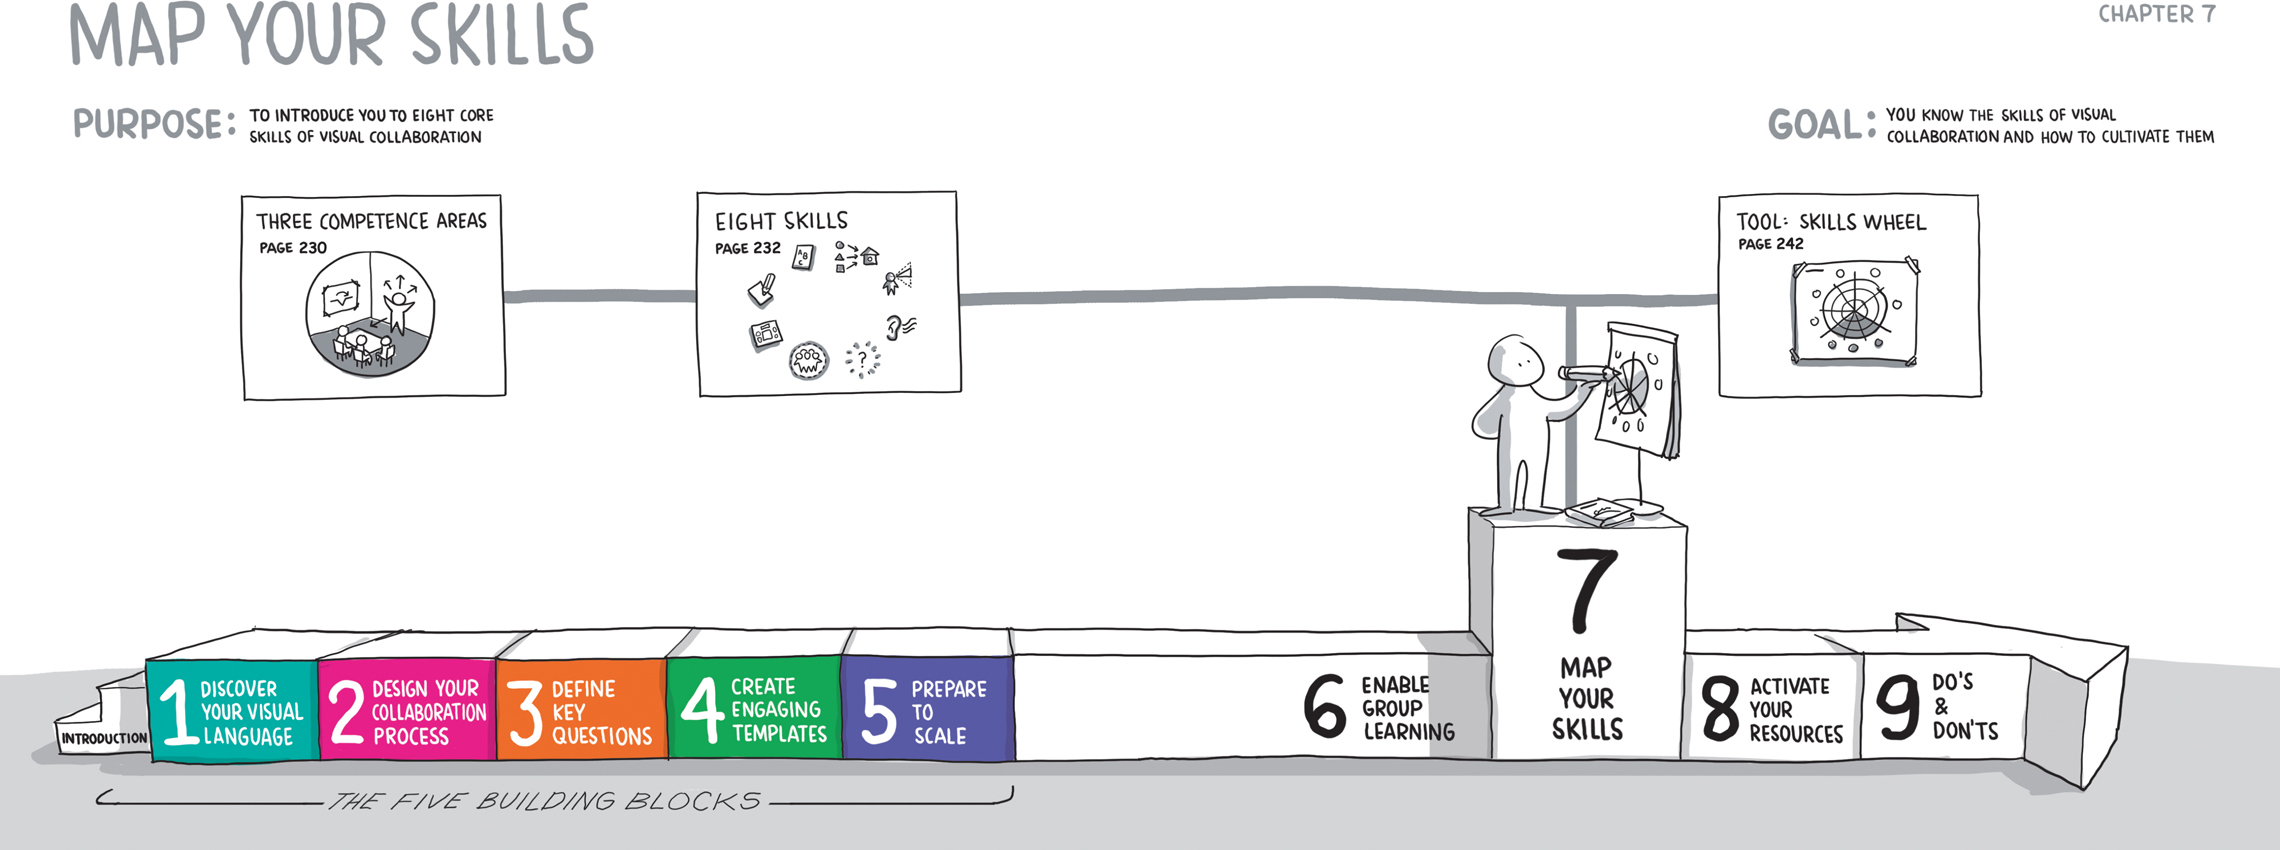 Cartoon image of five blocks placed side to side, along with an image each representative of them drawn above them. These blocks are together labeled “the five building blocks,” and are individually labeled the following, from left to right: (1) discover your visual language, (2) design your collaboration process, (3) define key questions, (4) create engaging templates, and (5) prepare to scale., (6) enable group learning, (7) map your skills, (8) activate your resources, and (9) Do's and Don'ts. Drawn above these are posters with related images with the following text: three competence area, eight skills, tool: skills wheel. A cartoon image of human icon on seventh block can be seen drawing a sketch on an easel.